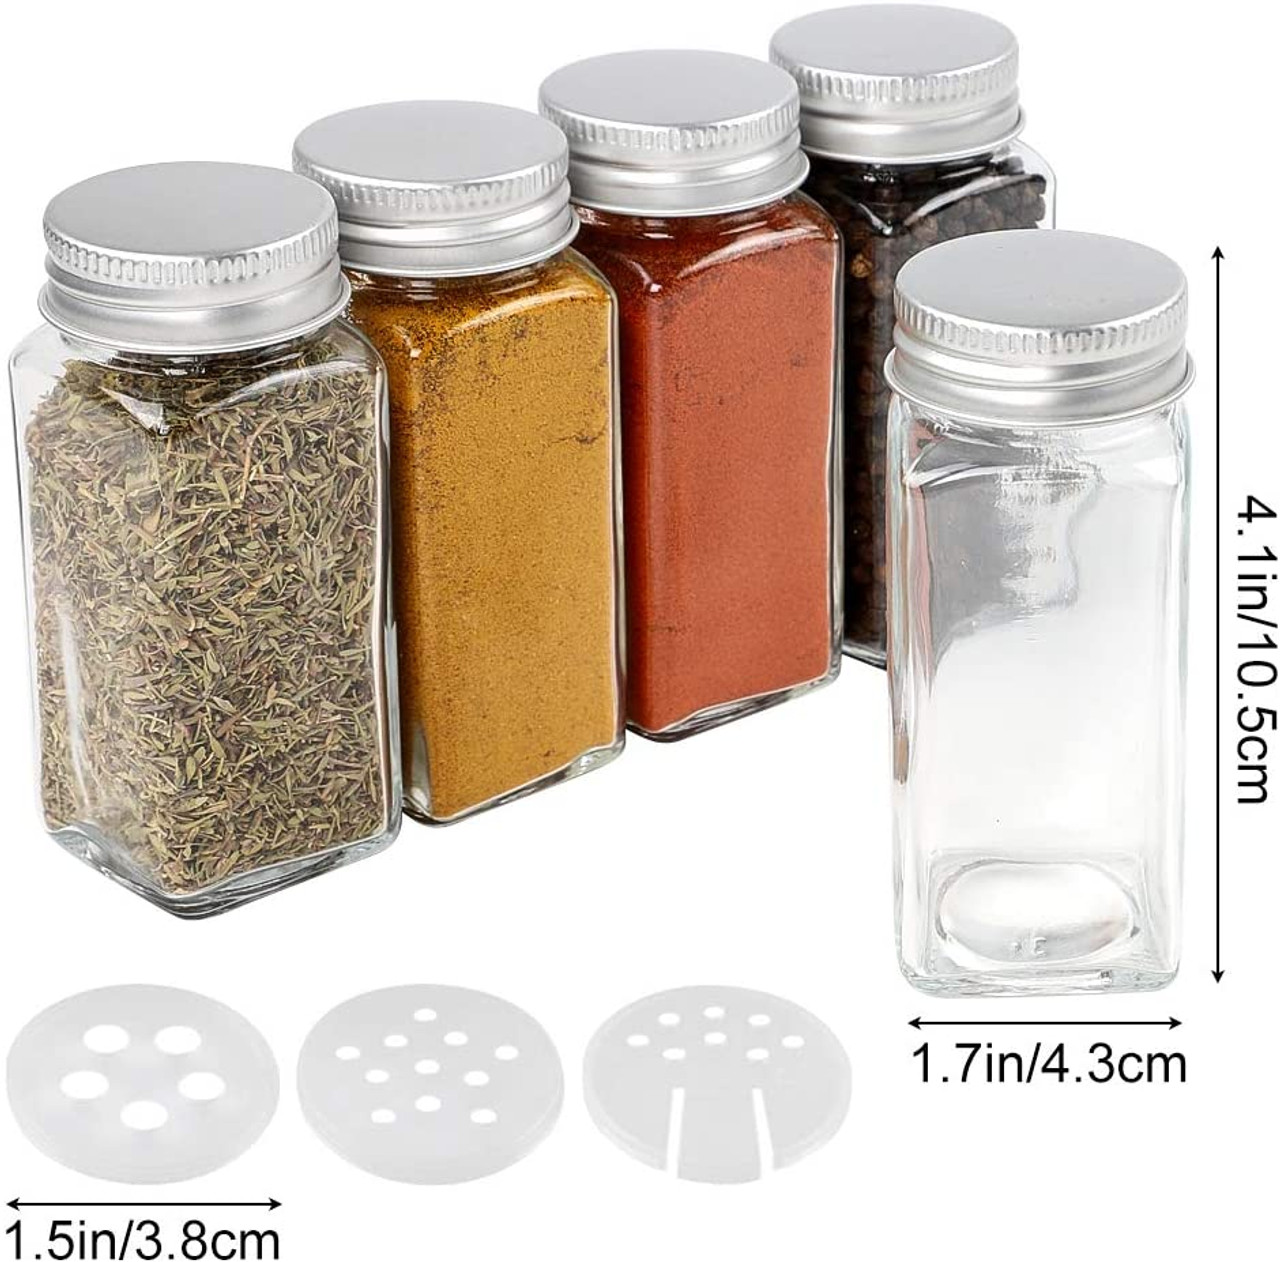 25pcs 4oz Glass Spice Jars Square Empty Spice Containers with